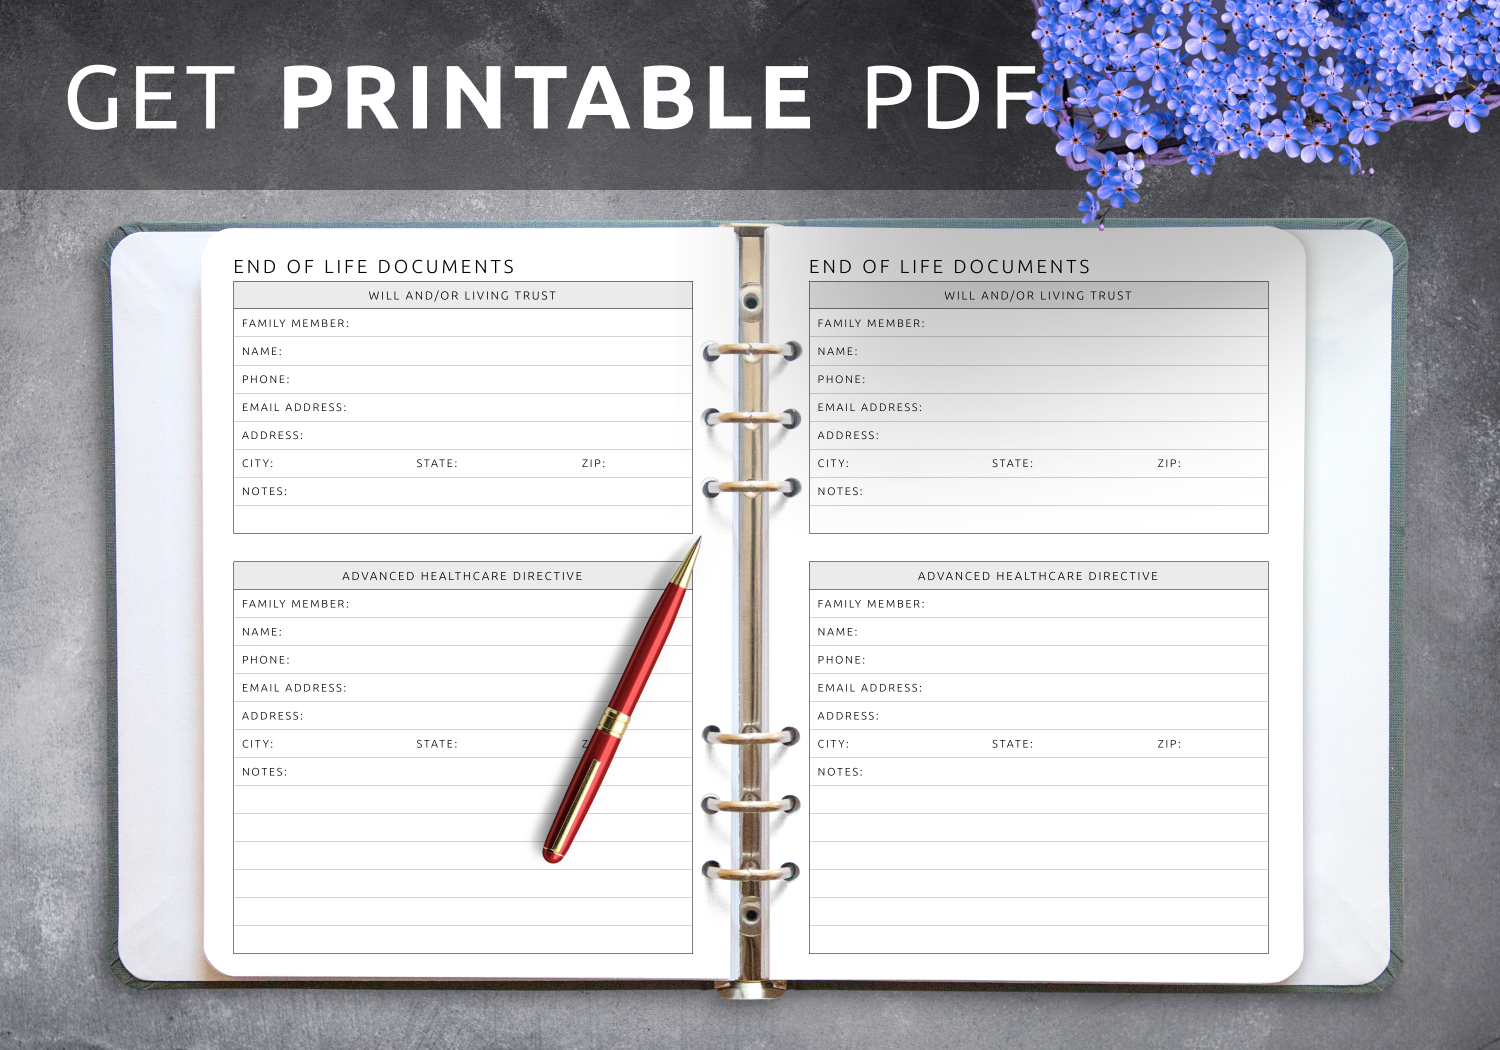 Free Printable End Of Life Planner Fruits Vegetables Seeds And Legumes such As Peas Beans